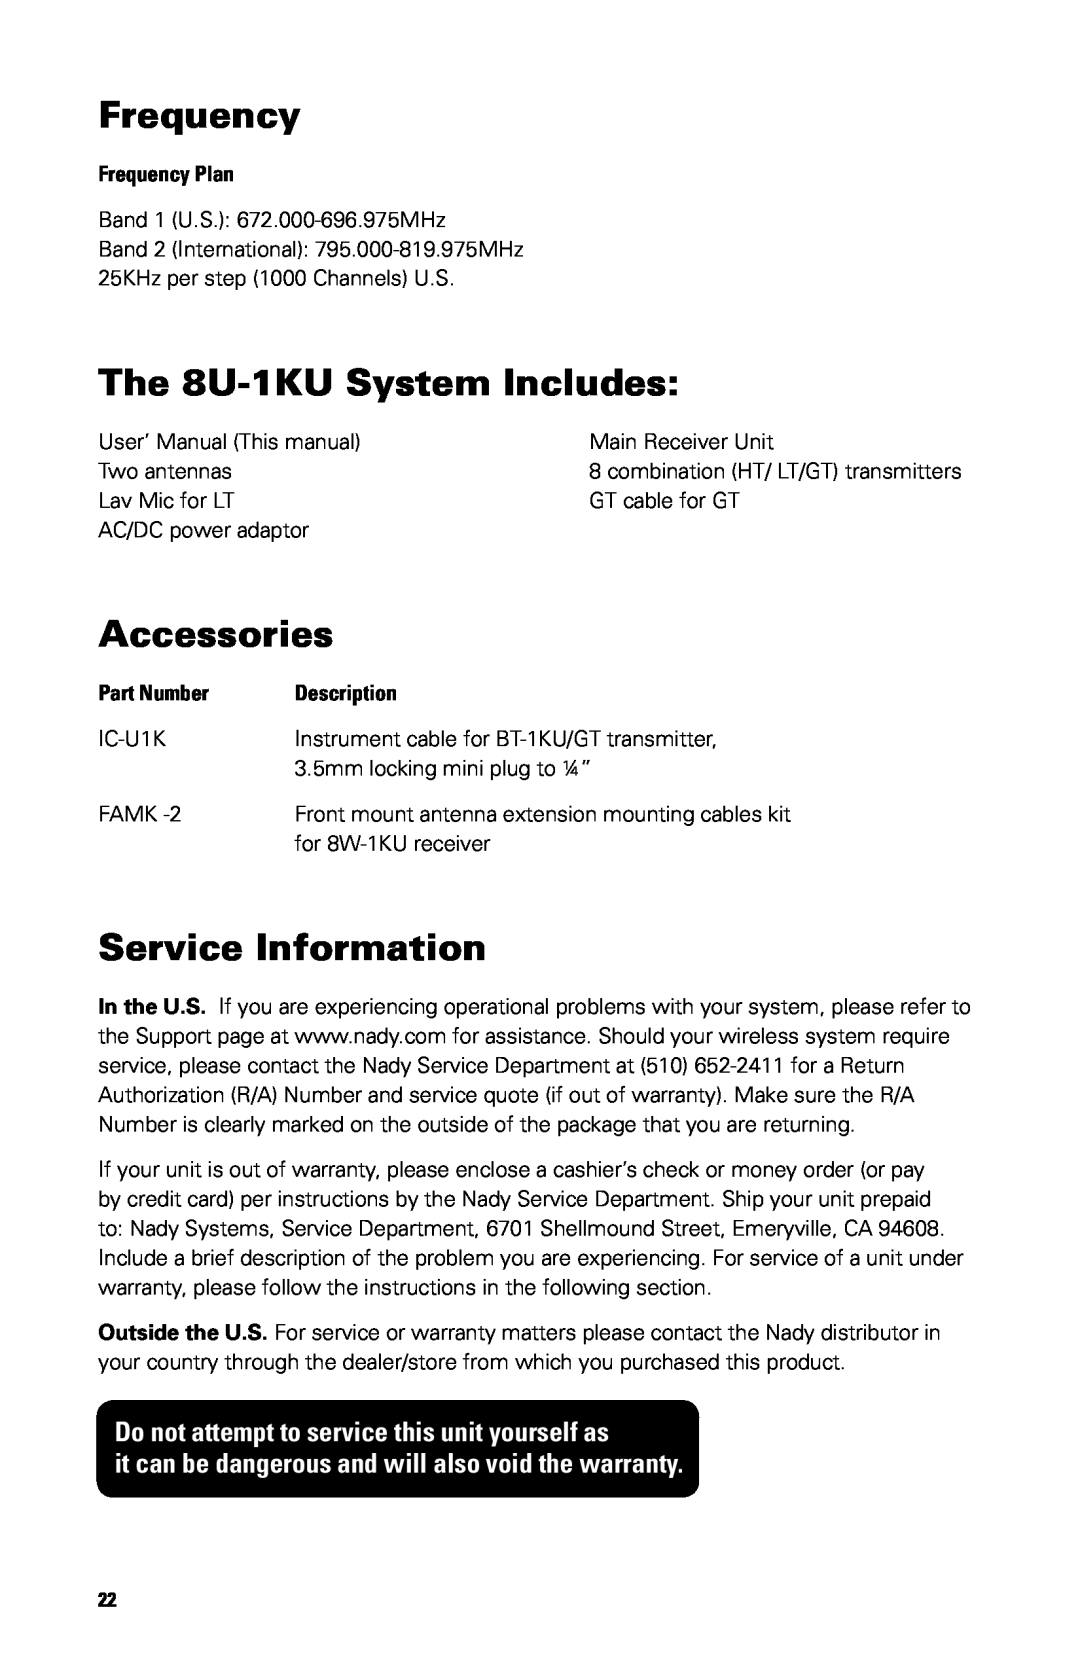 Nady Systems SW-1KU owner manual Frequency, The 8U-1KUSystem Includes, Accessories, Service Information 